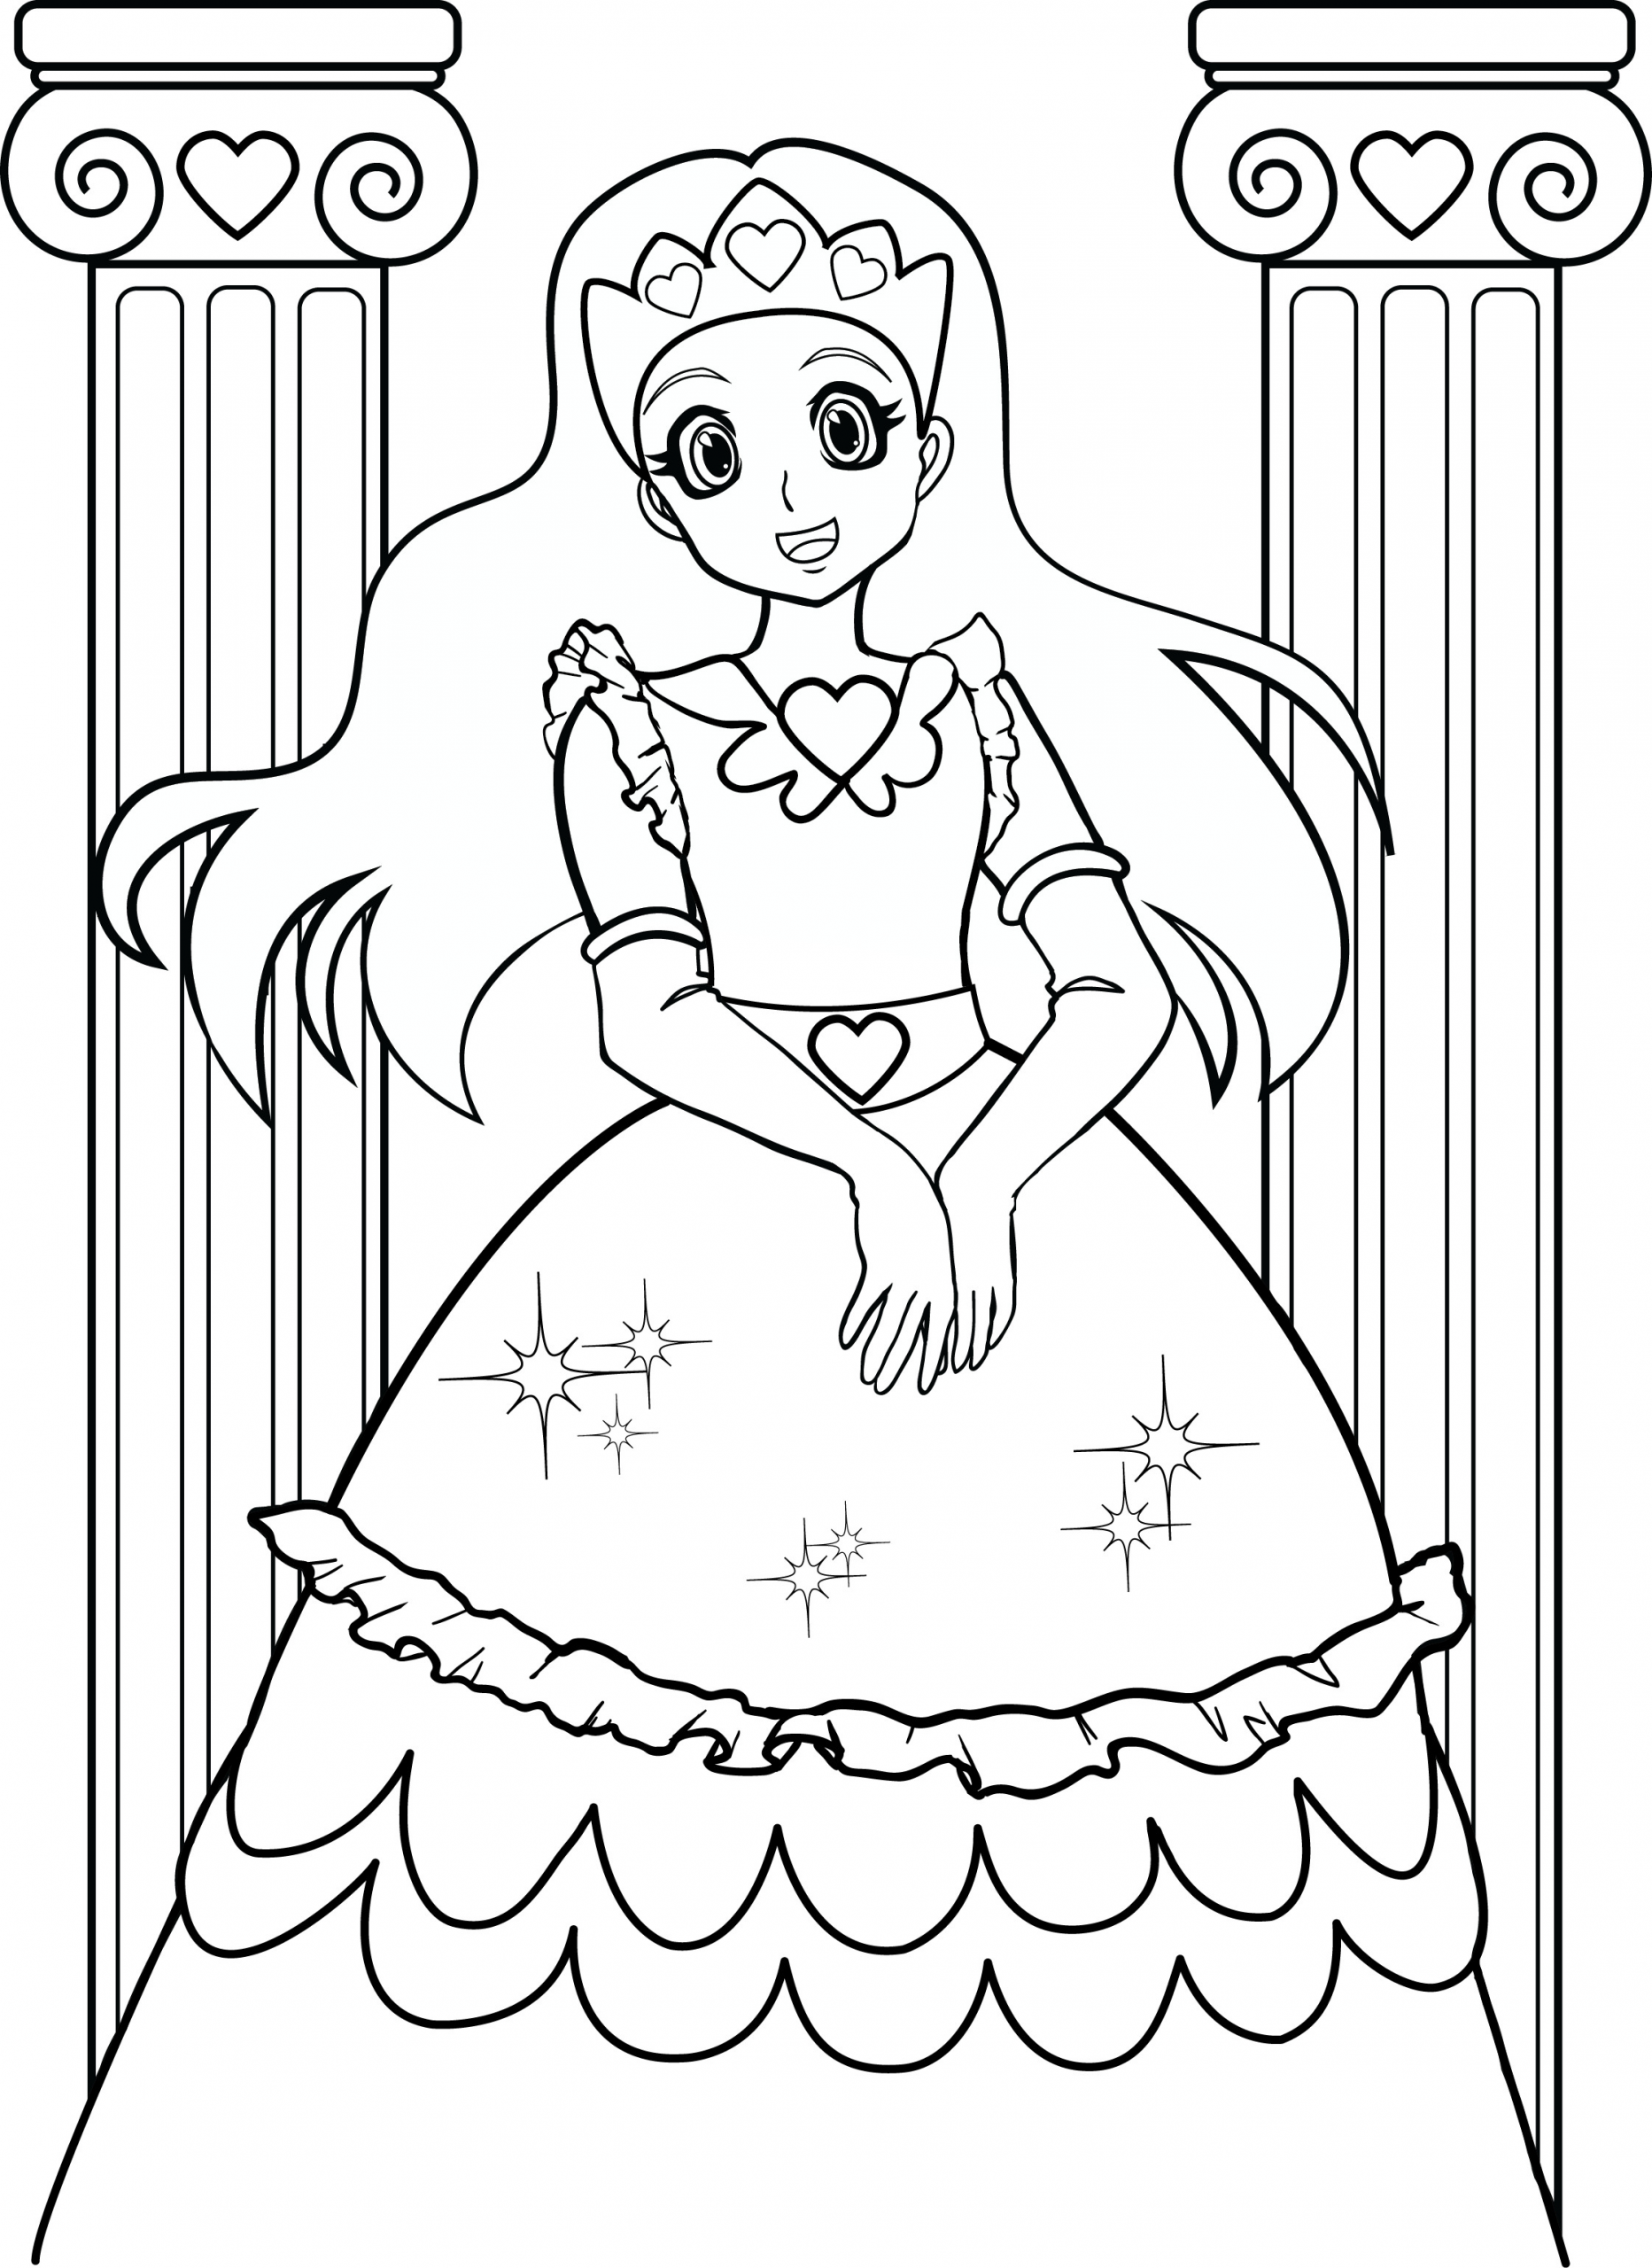 Free Printable Coloring Pages For Girls
 Coloring Pages For Girls 7